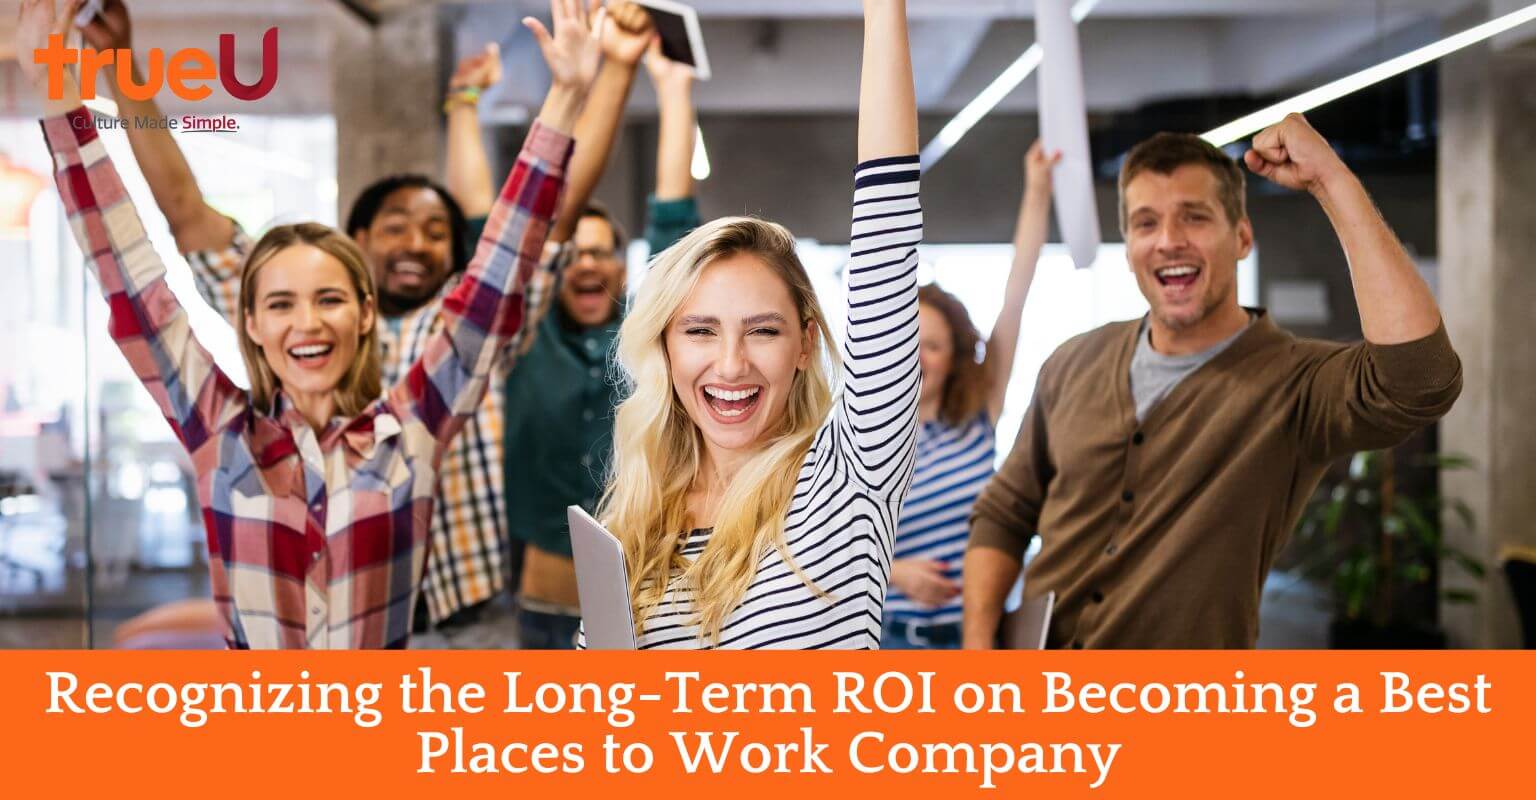 Recognizing the Long-Term ROI on Becoming a Best Places to Work Company